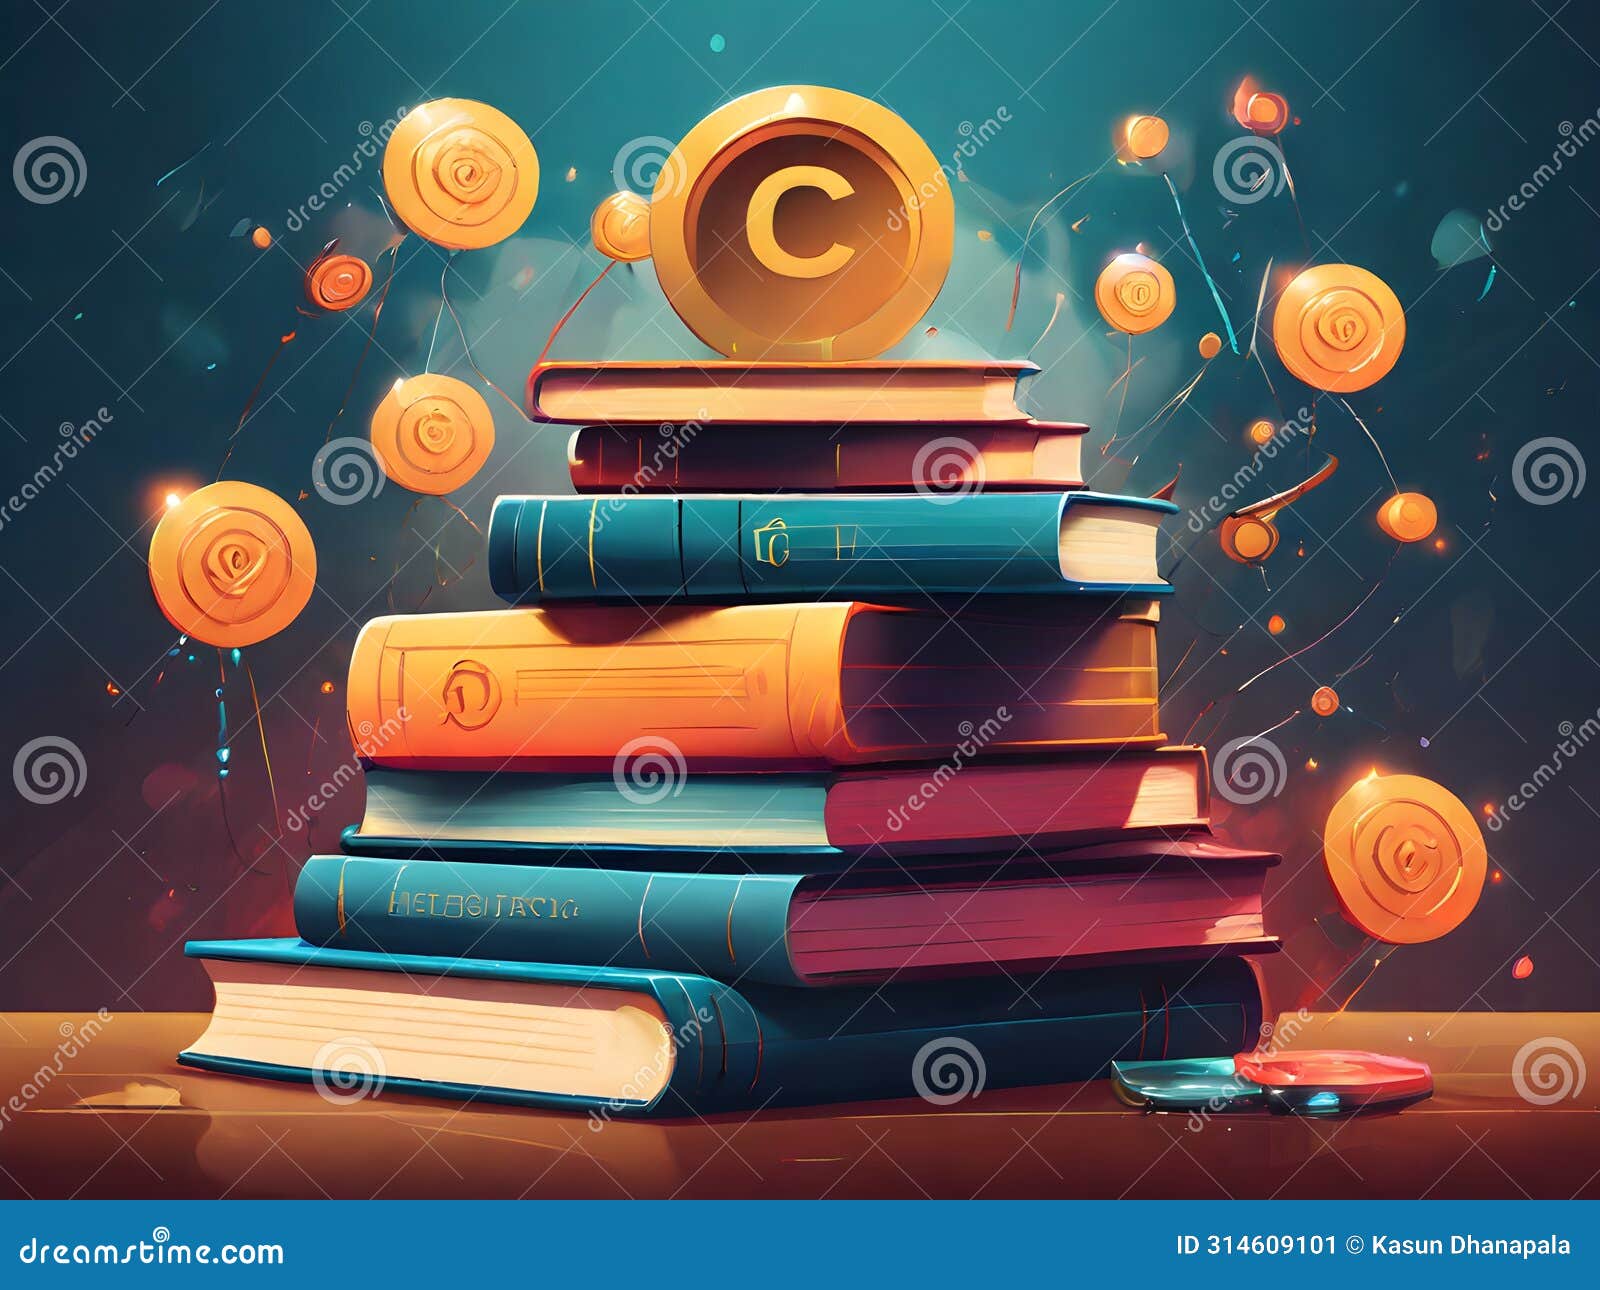 world book and copyright day, april 23